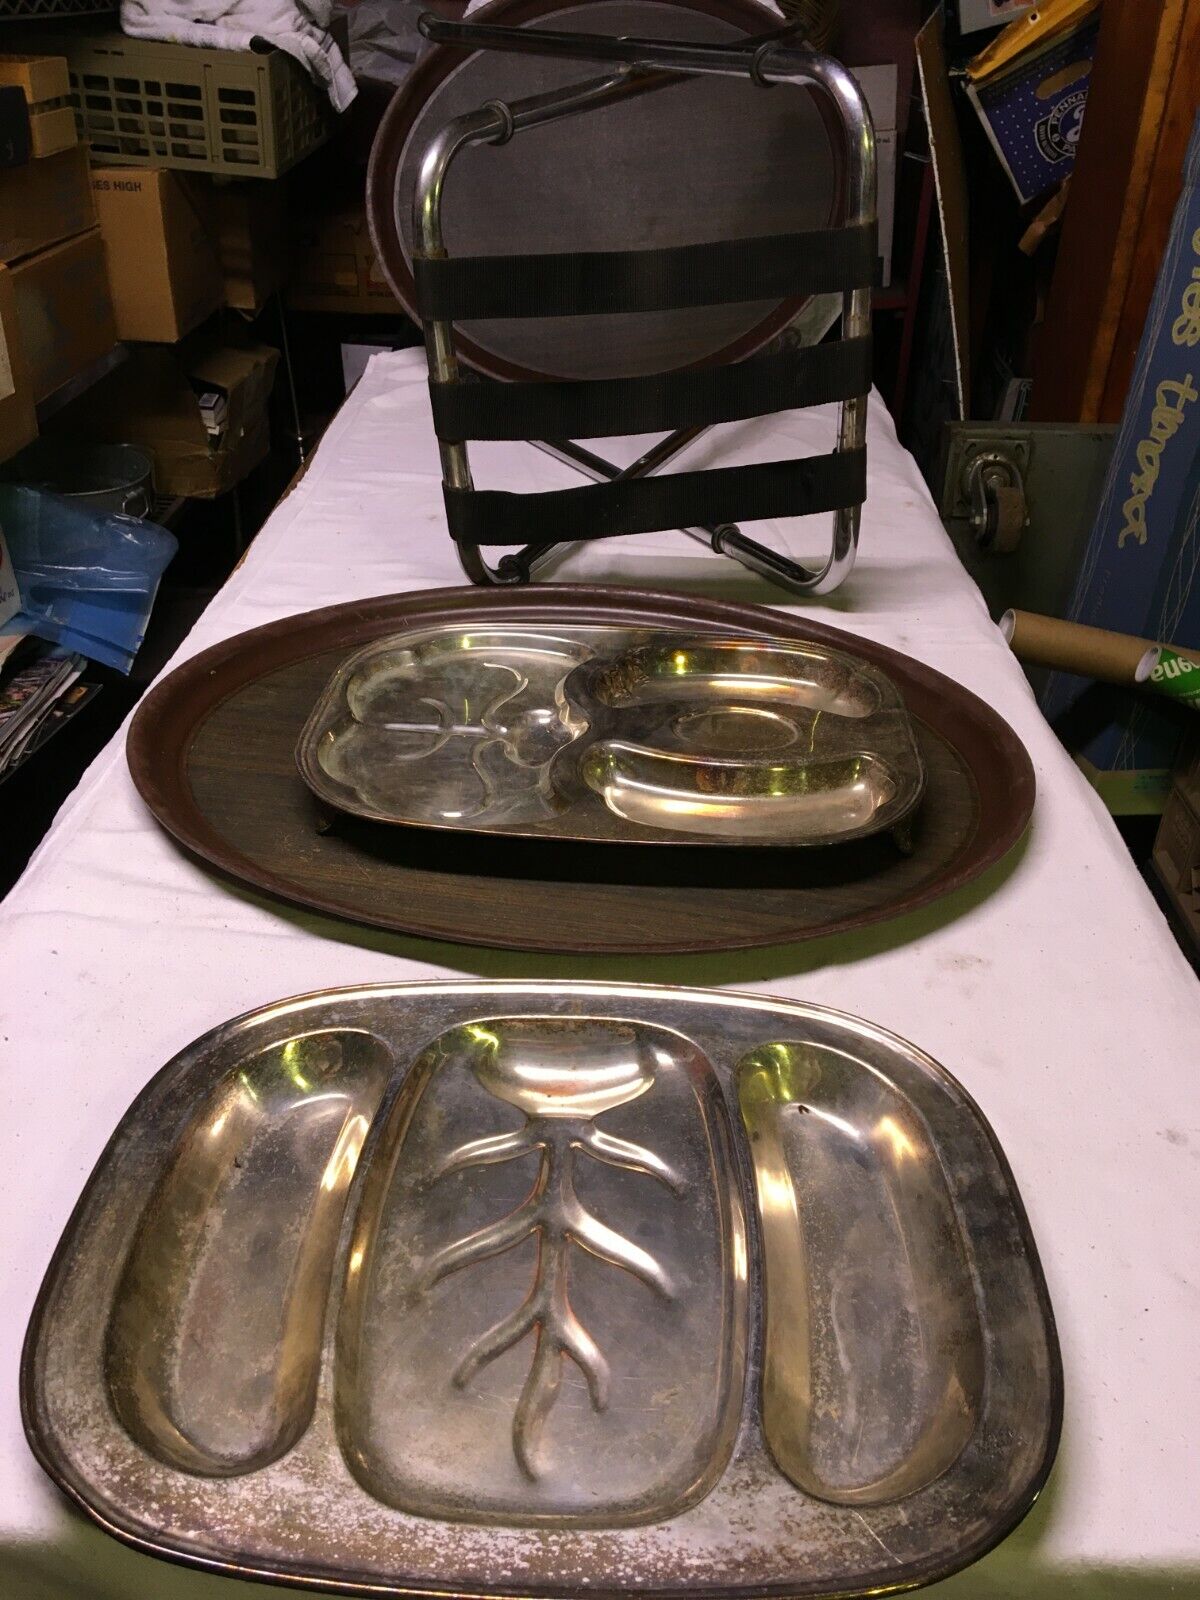 2 Waiter Waitress Trays Metal Stand 2 large Well & Tree Platters Ceramic Carafe